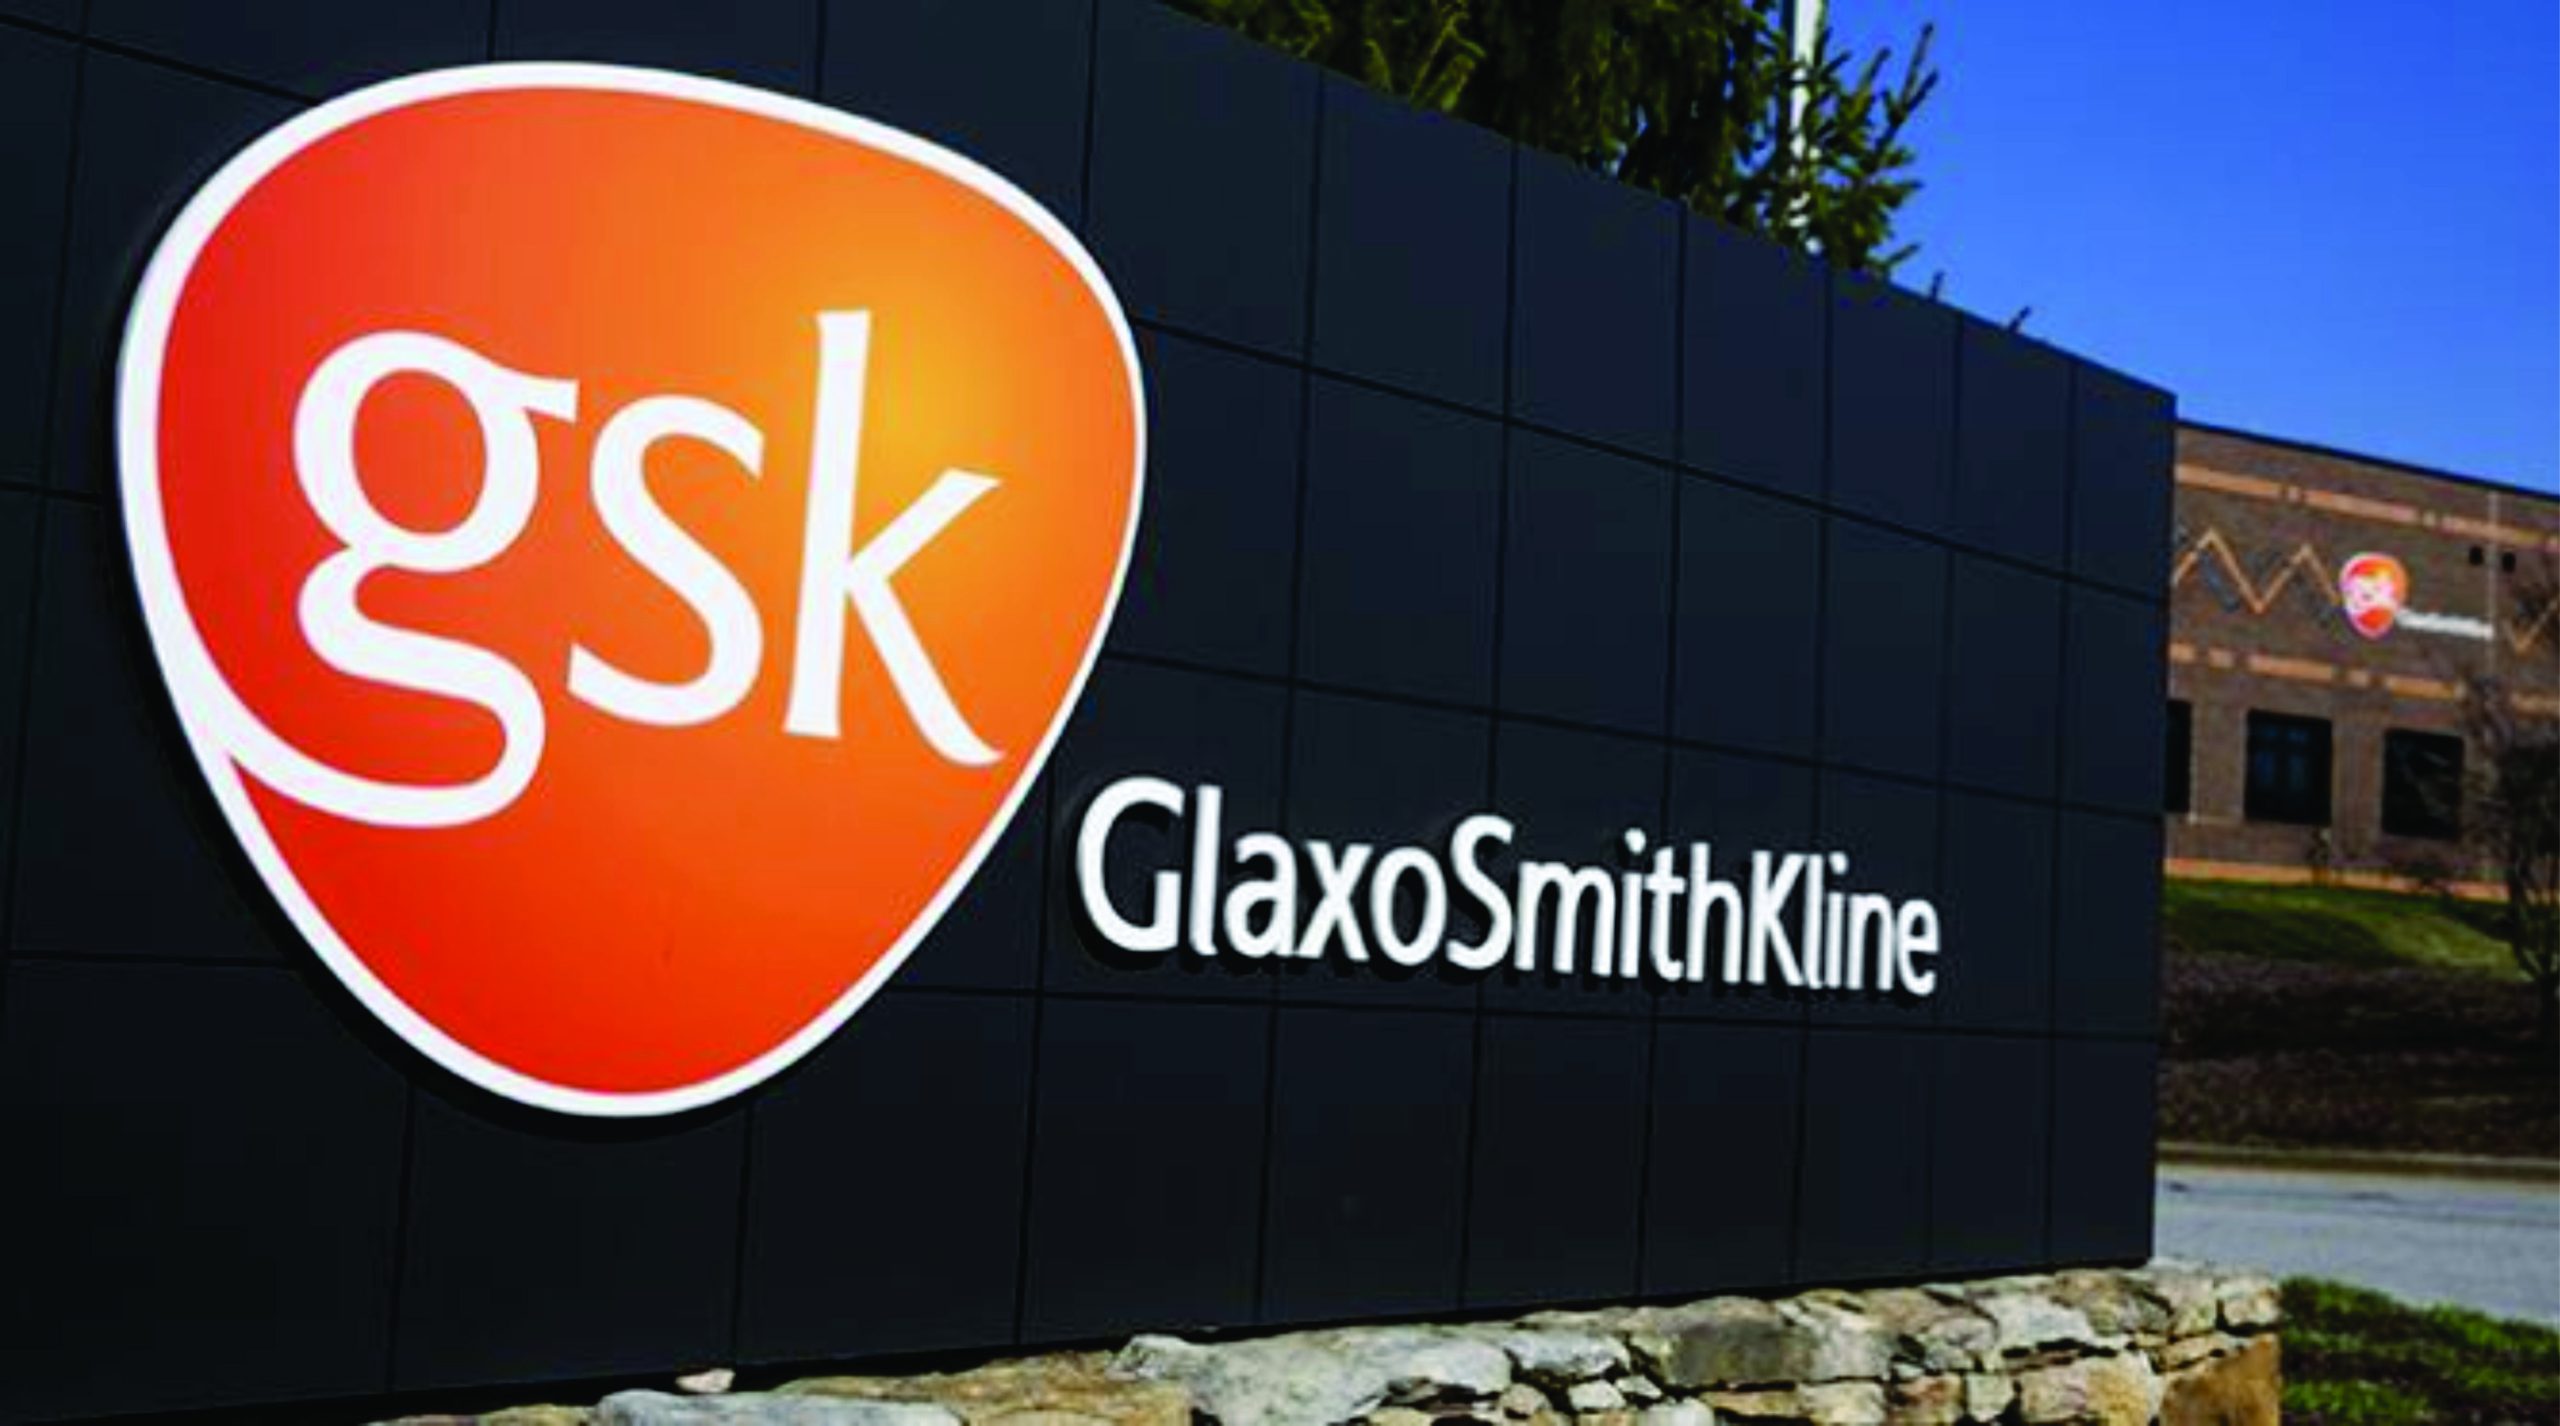 After over 50 years of operations, GlaxoSmithKline shuts down in Nigeria amid economic downturn